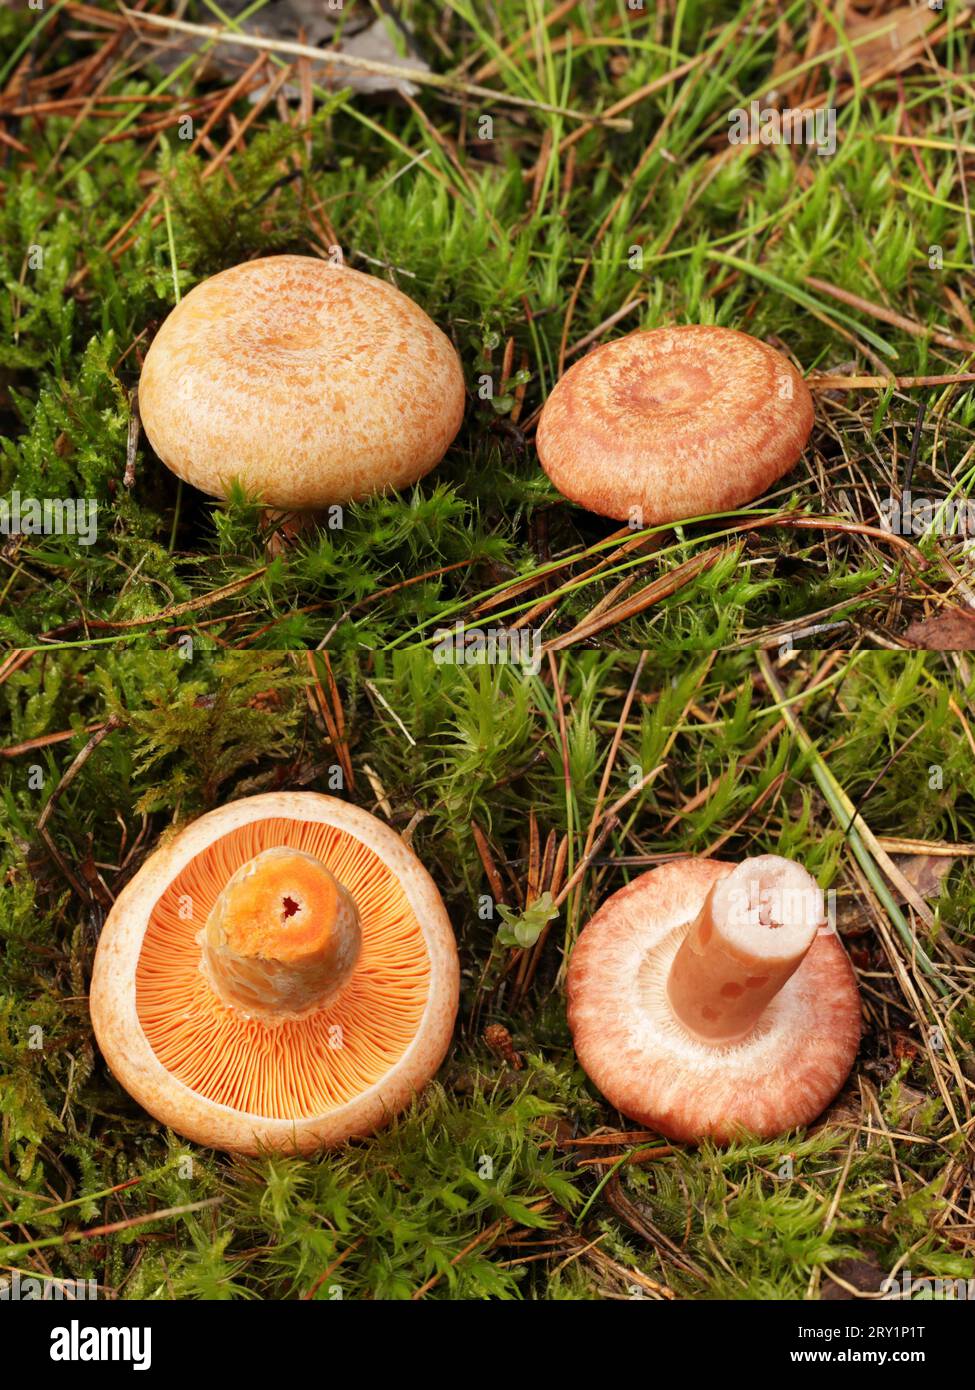 On the left is the tasty and edible saffron milk cap mushroom, and on the right is the conditionally edible woolly milkcap. Stock Photo